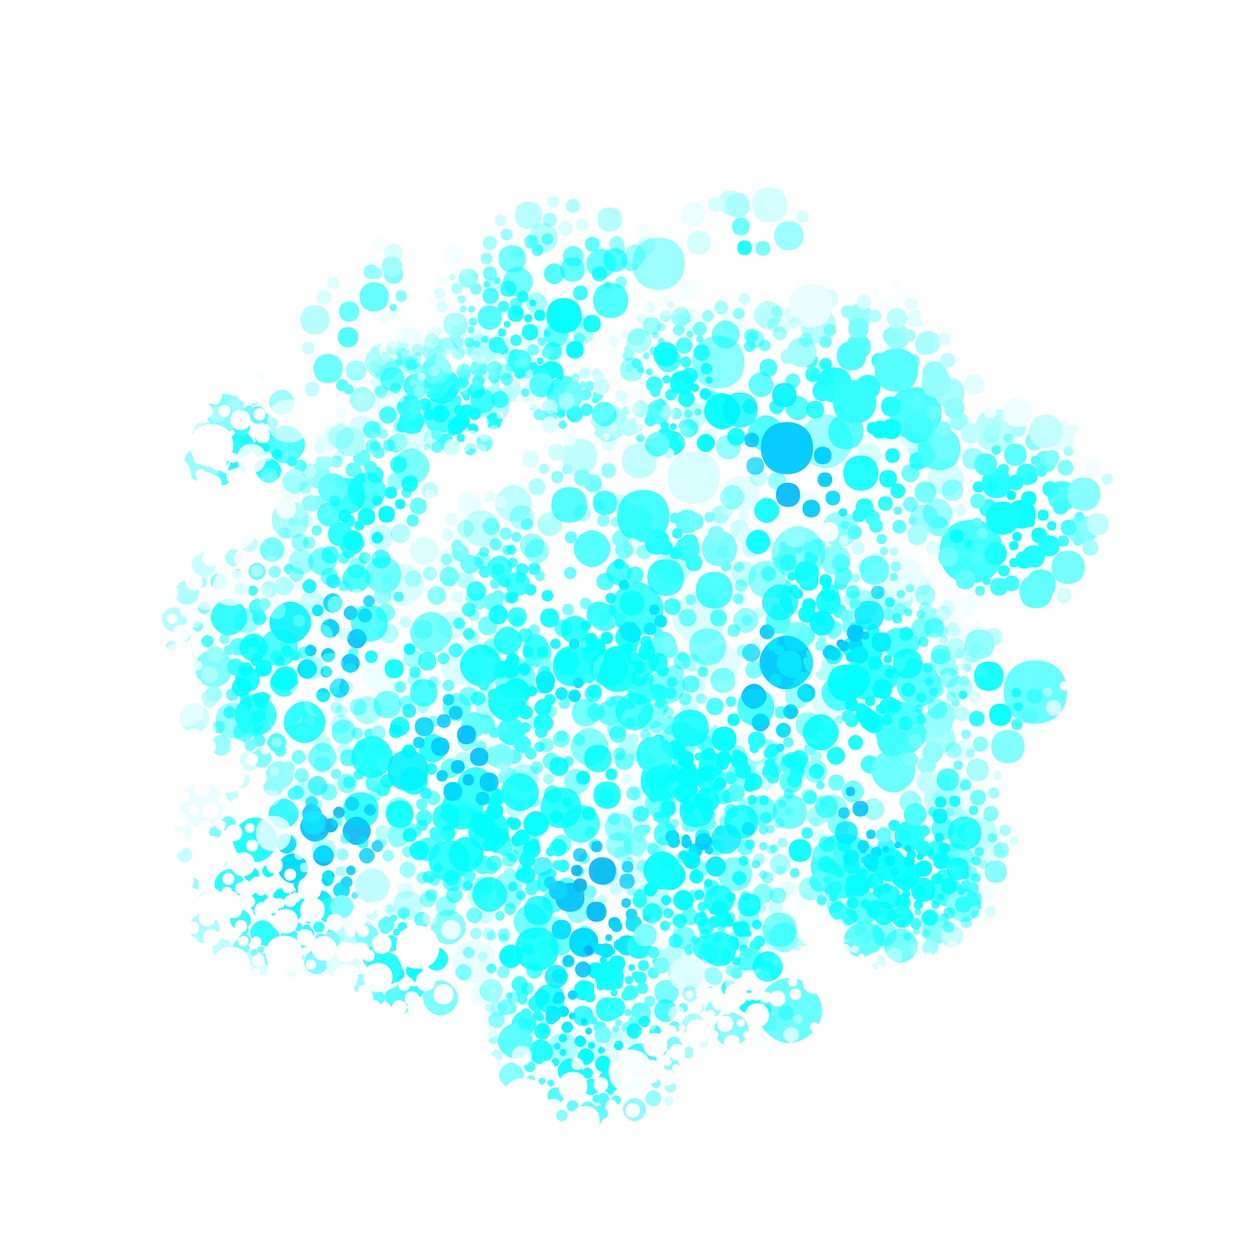 abstract blue bubble pattern background Photoshop brush